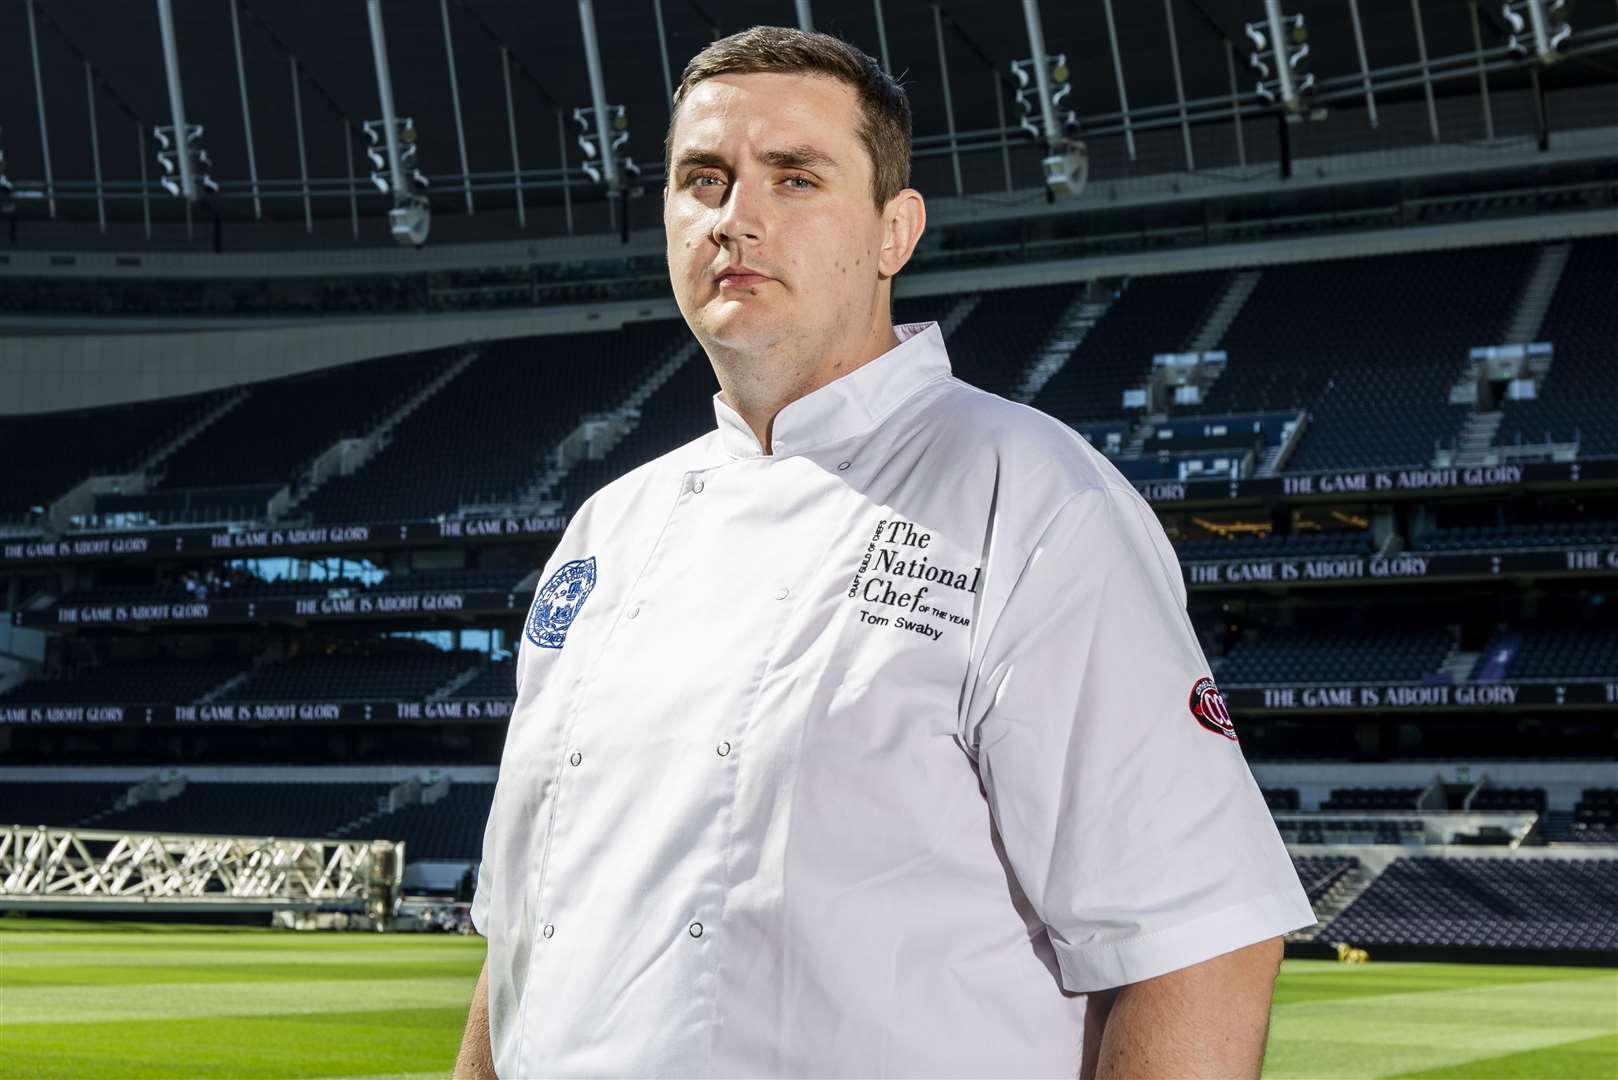 Thomas Swaby was previously head chef of a luxury hotel in Scotland - and is about to take up a job in the Caribbean